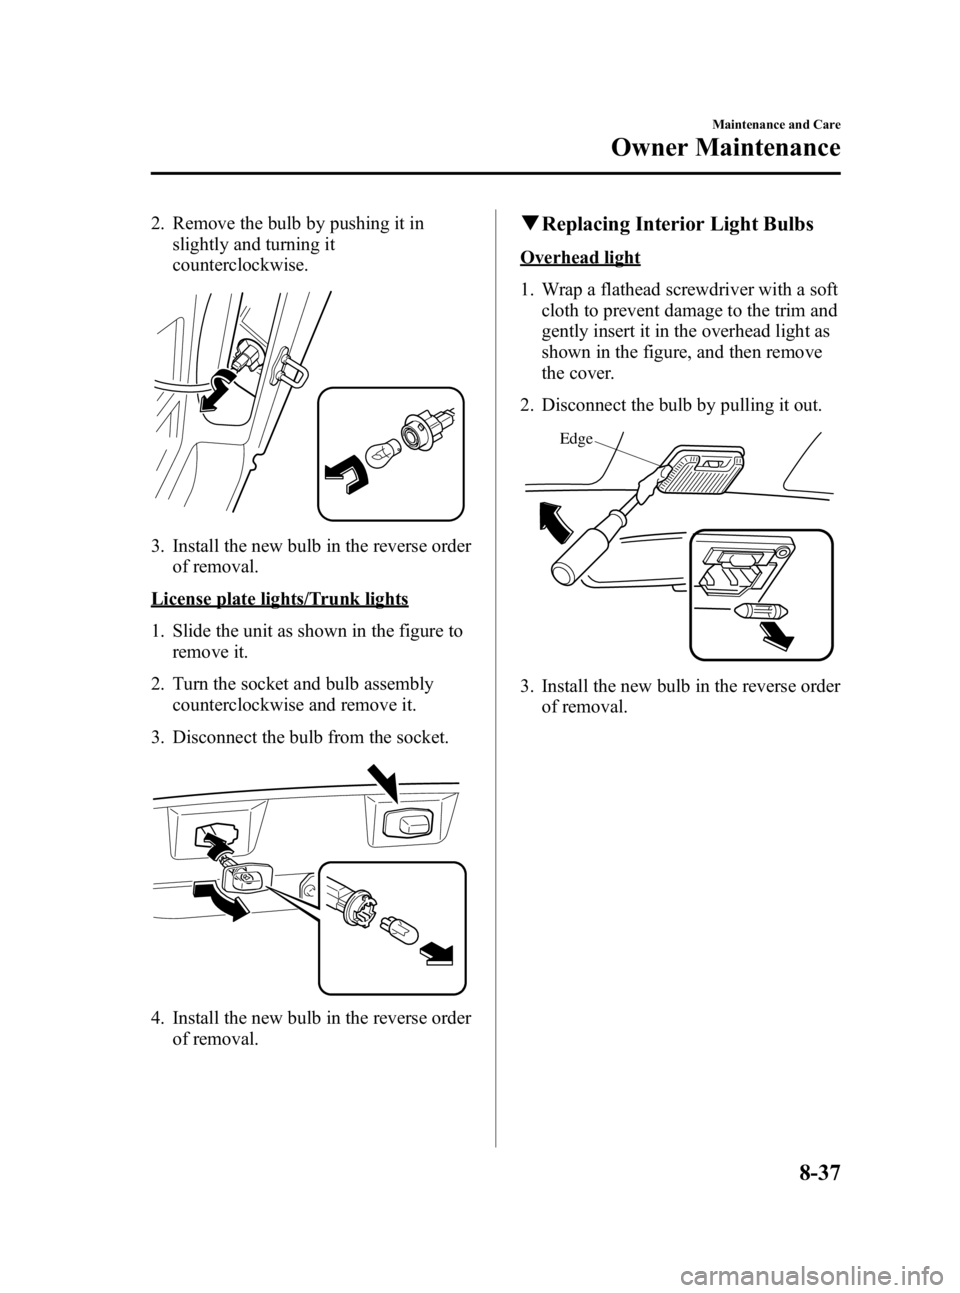 MAZDA MODEL MX-5 MIATA 2005  Owners Manual Black plate (253,1)
2. Remove the bulb by pushing it inslightly and turning it
counterclockwise.
3. Install the new bulb in the reverse orderof removal.
License plate lights/Trunk lights
1. Slide the 